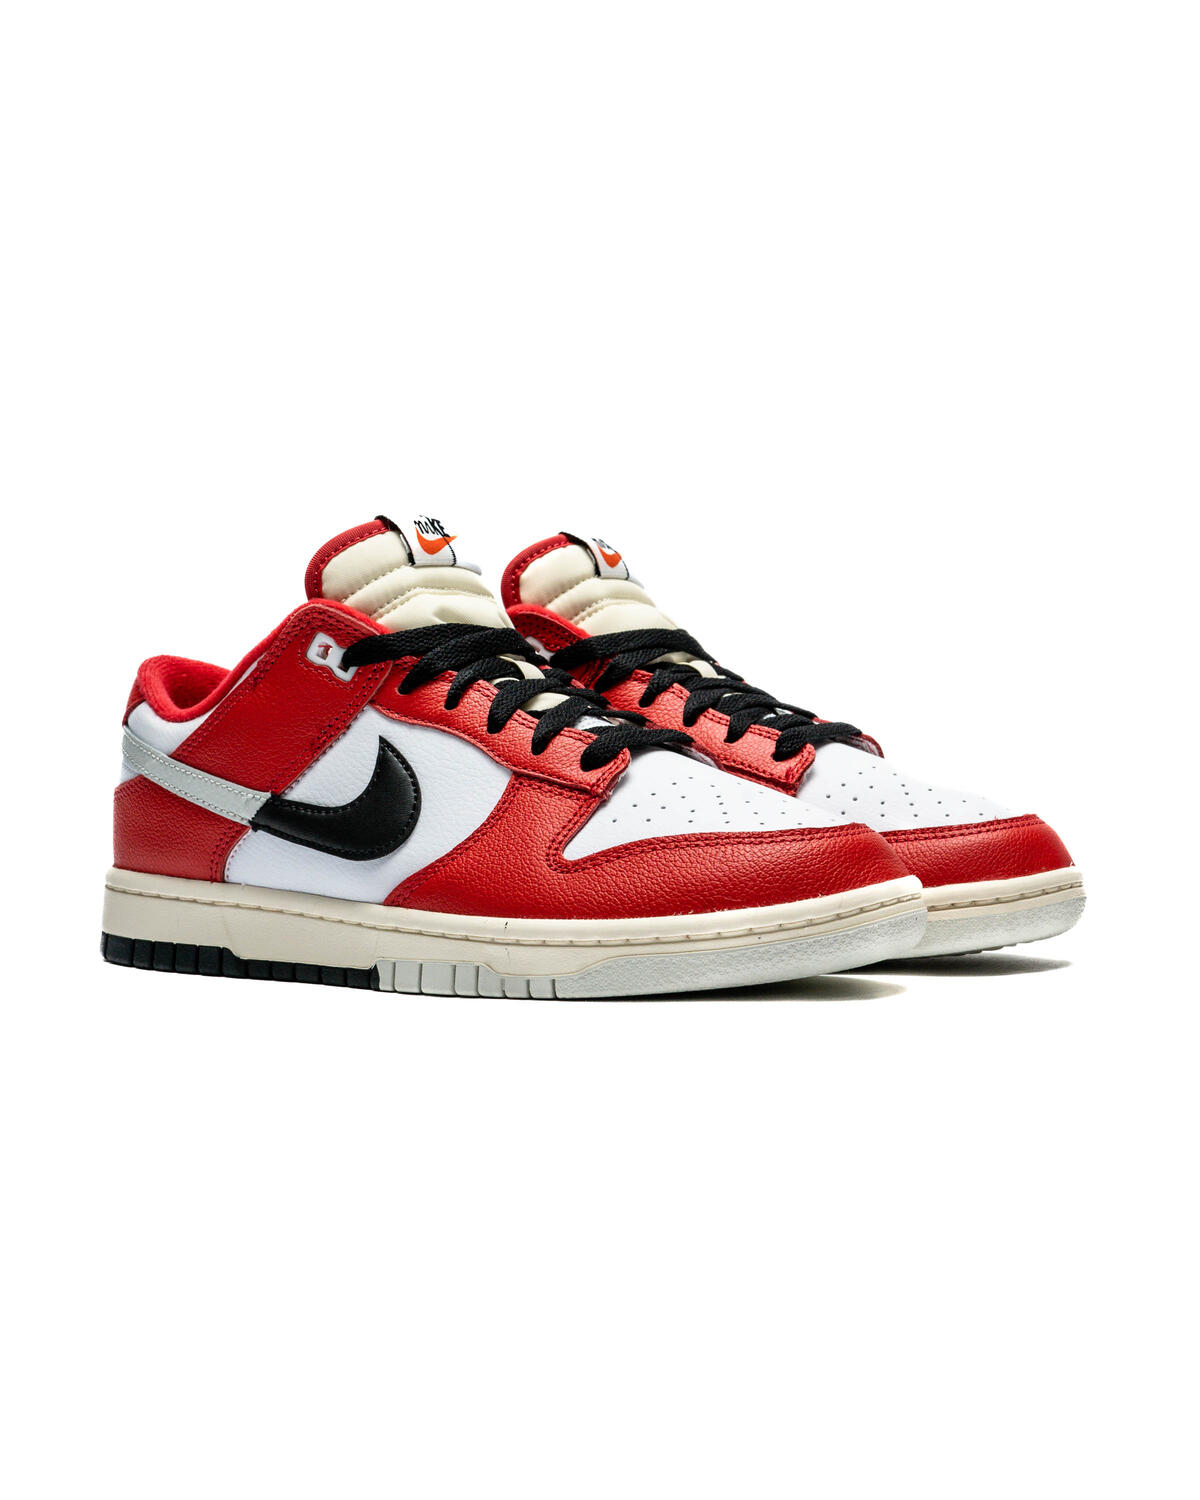 Nike Air Force 1 Custom Low Chicago Red Black White Casual Shoes Men Women  Kids